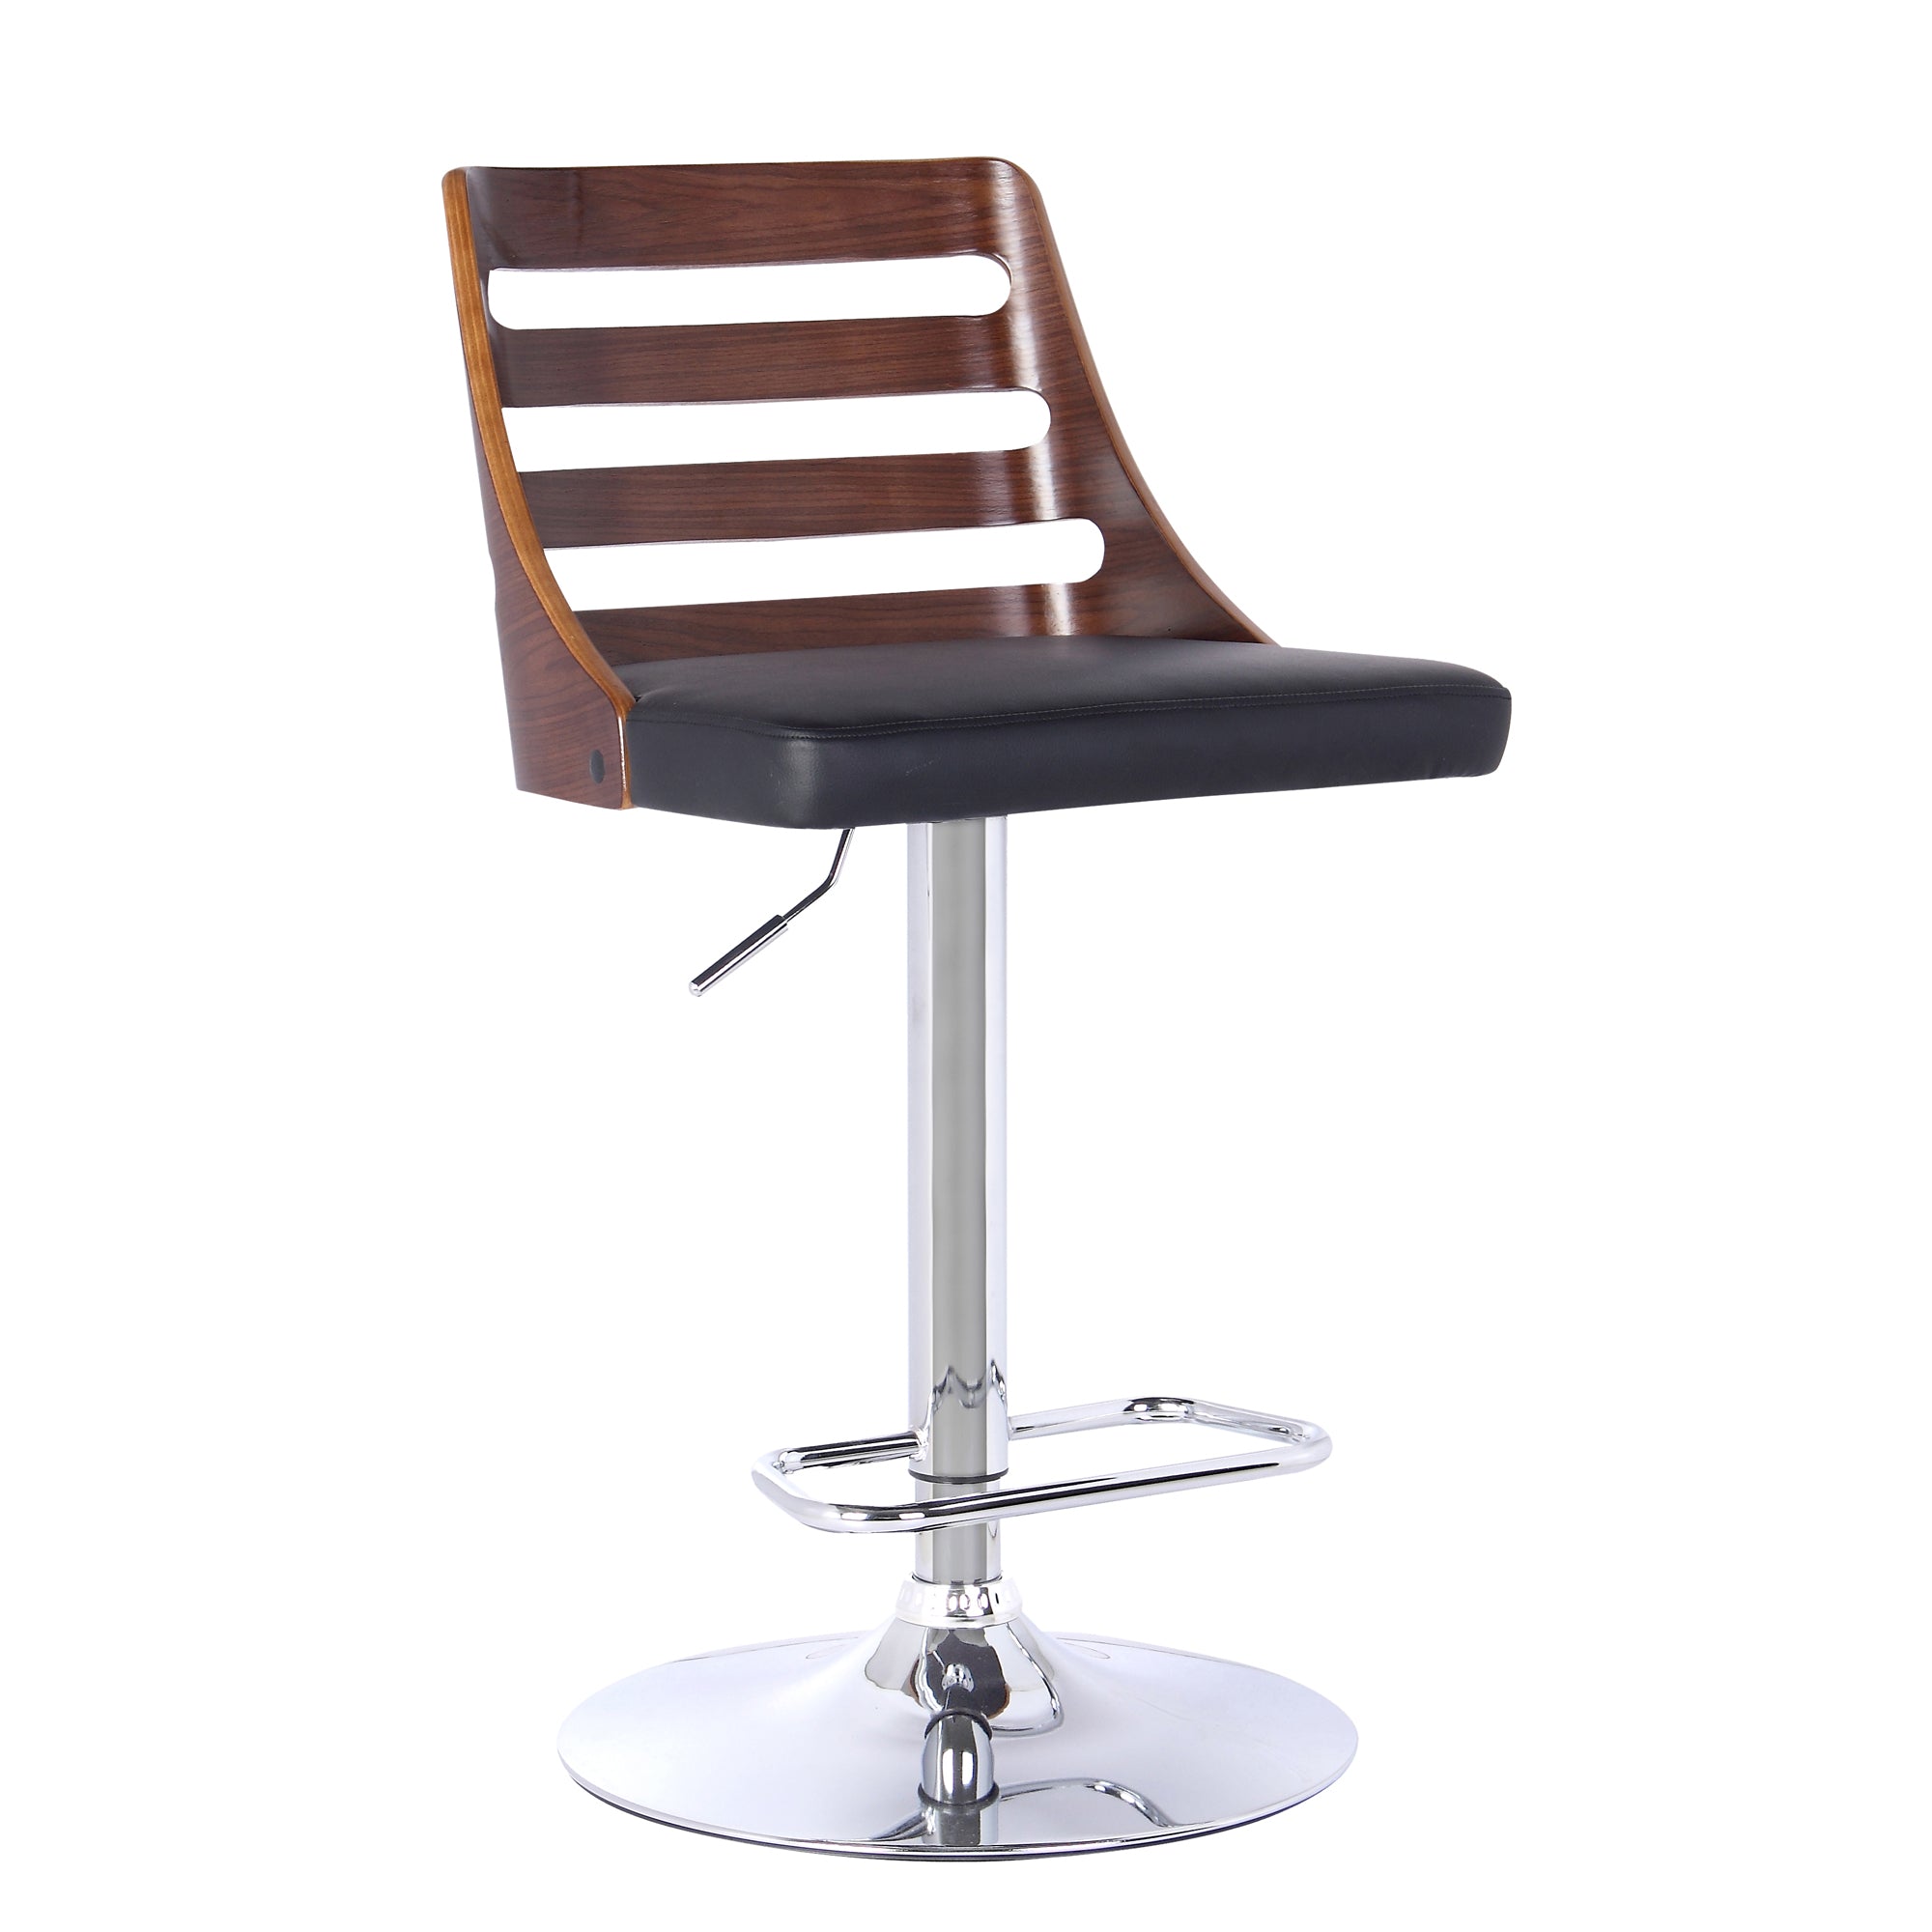 Armen Living Lcstbawabl Storm Barstool In Chrome Finish With Walnut Wood And Black Faux Leather